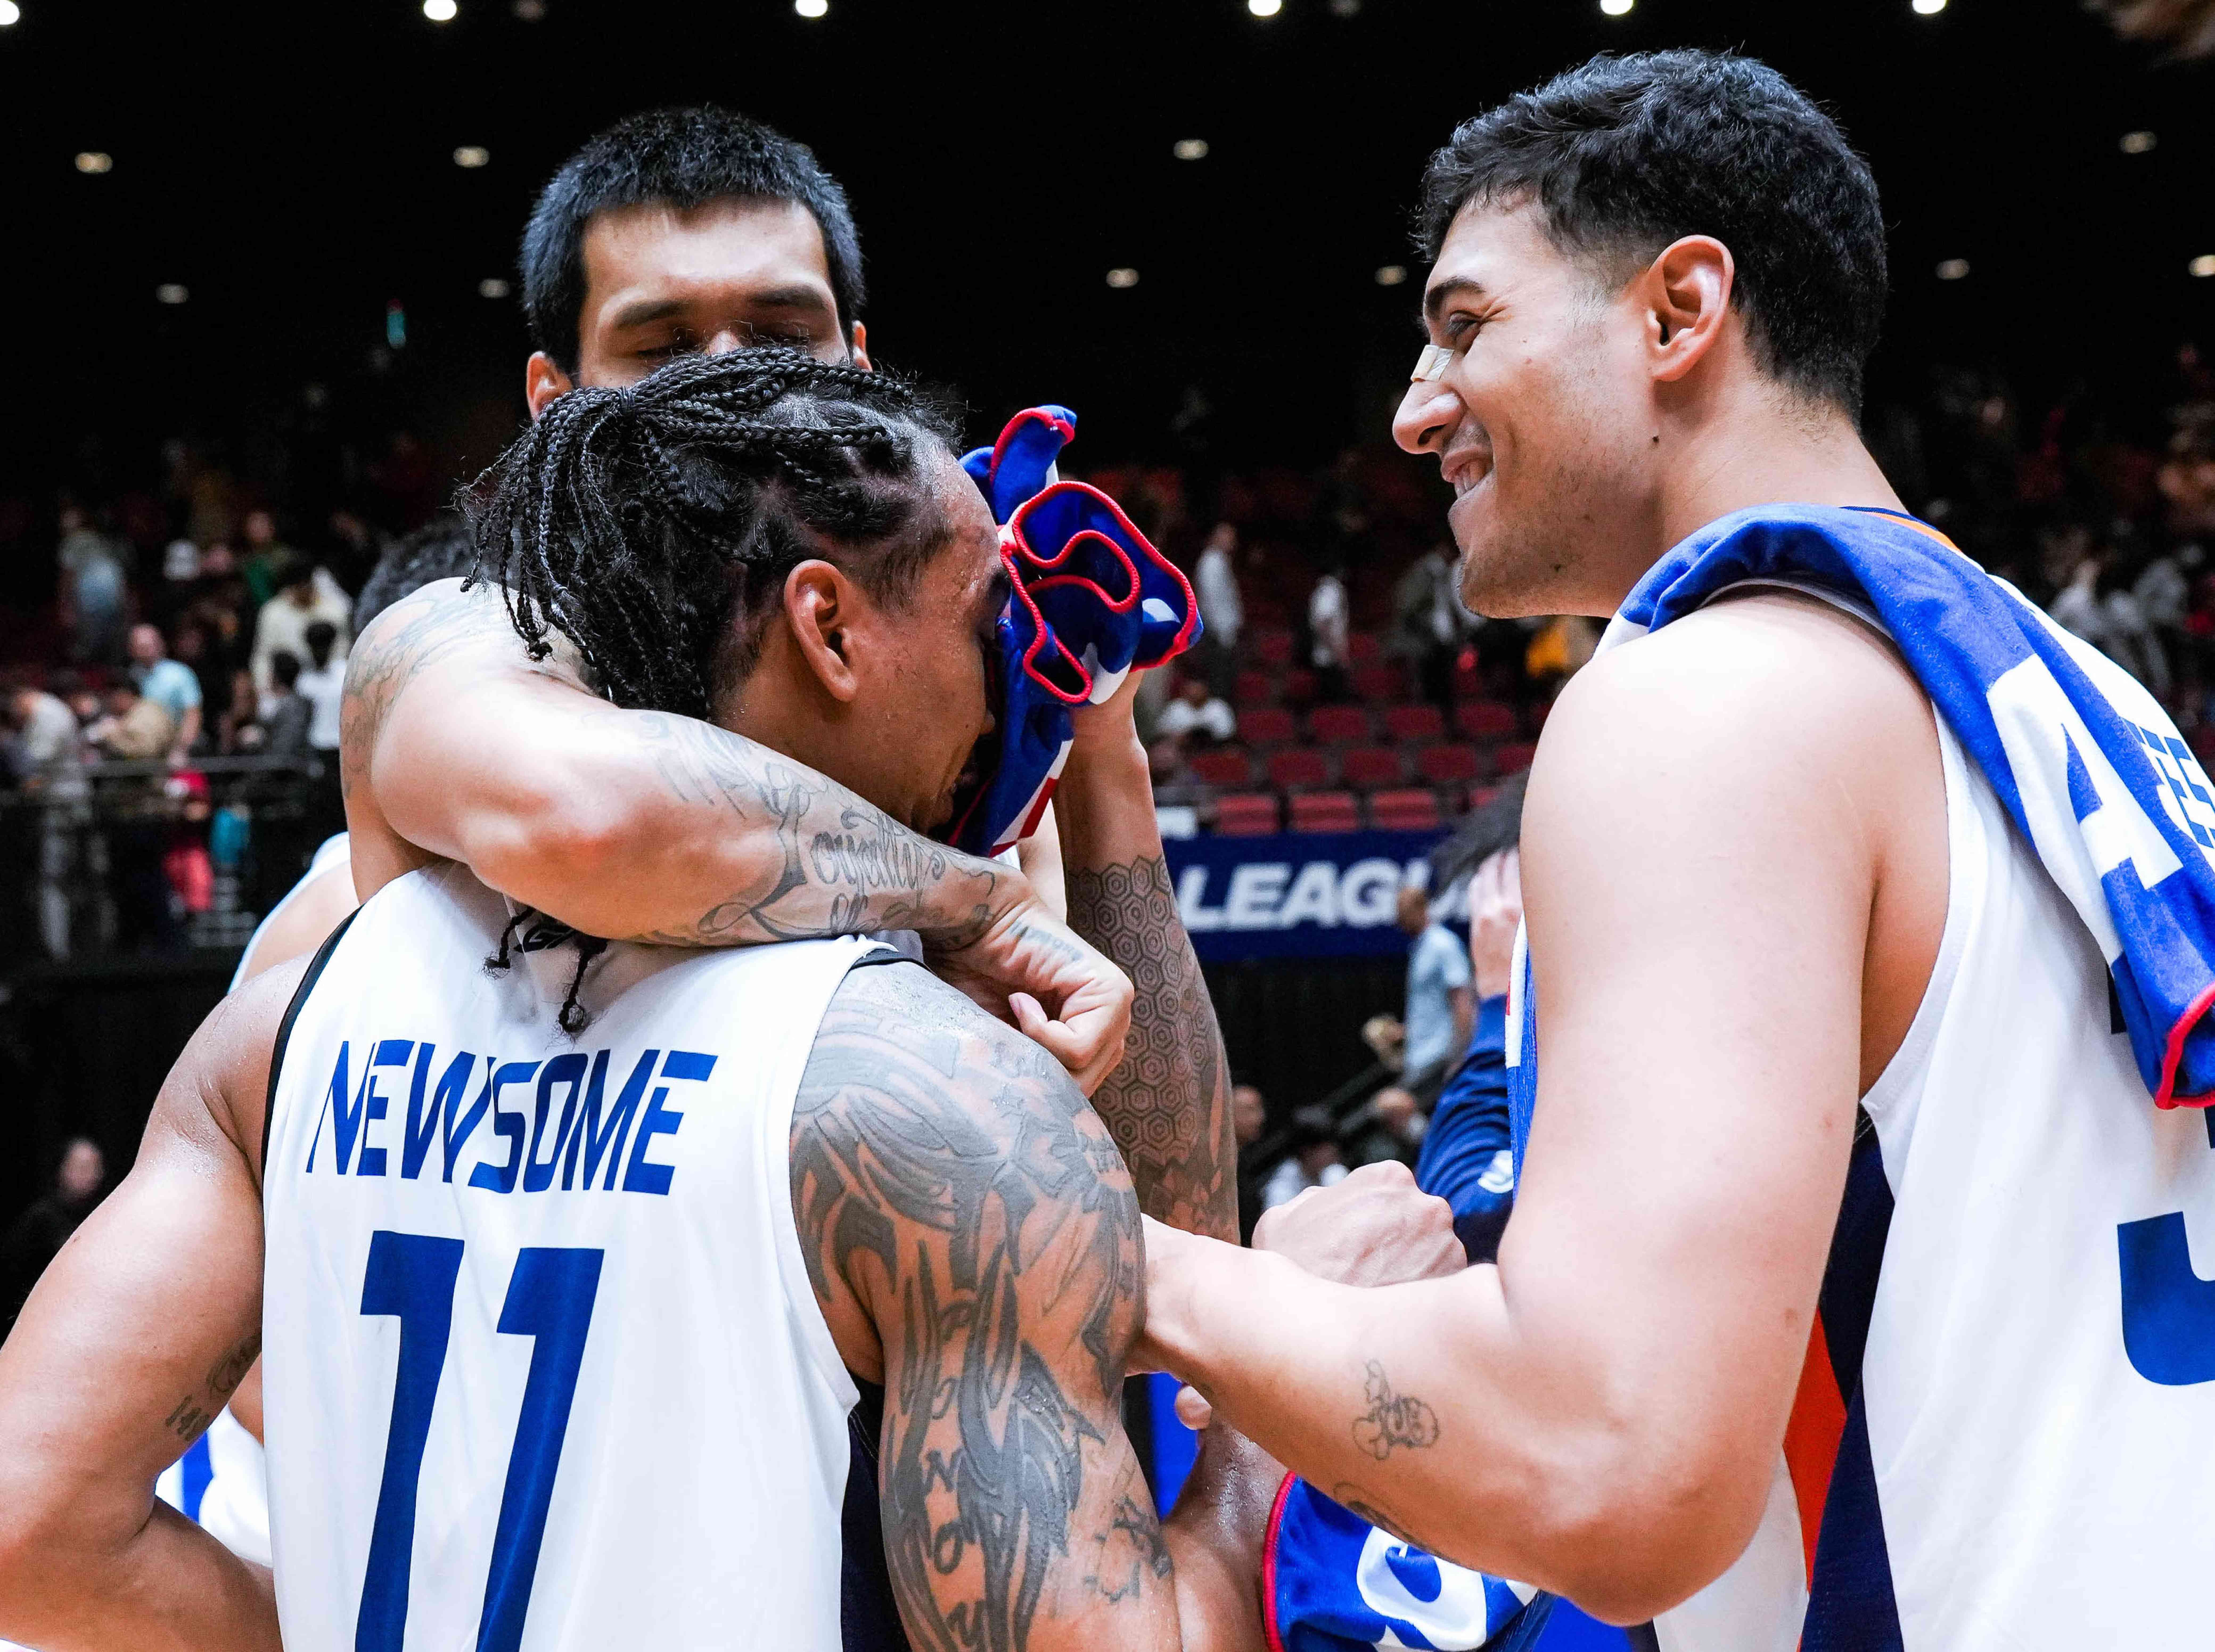 Chris Newsome (No. 11) ismobbed by teammates after his heroics in Meralco’s victory over Ryukyu in Macau. 